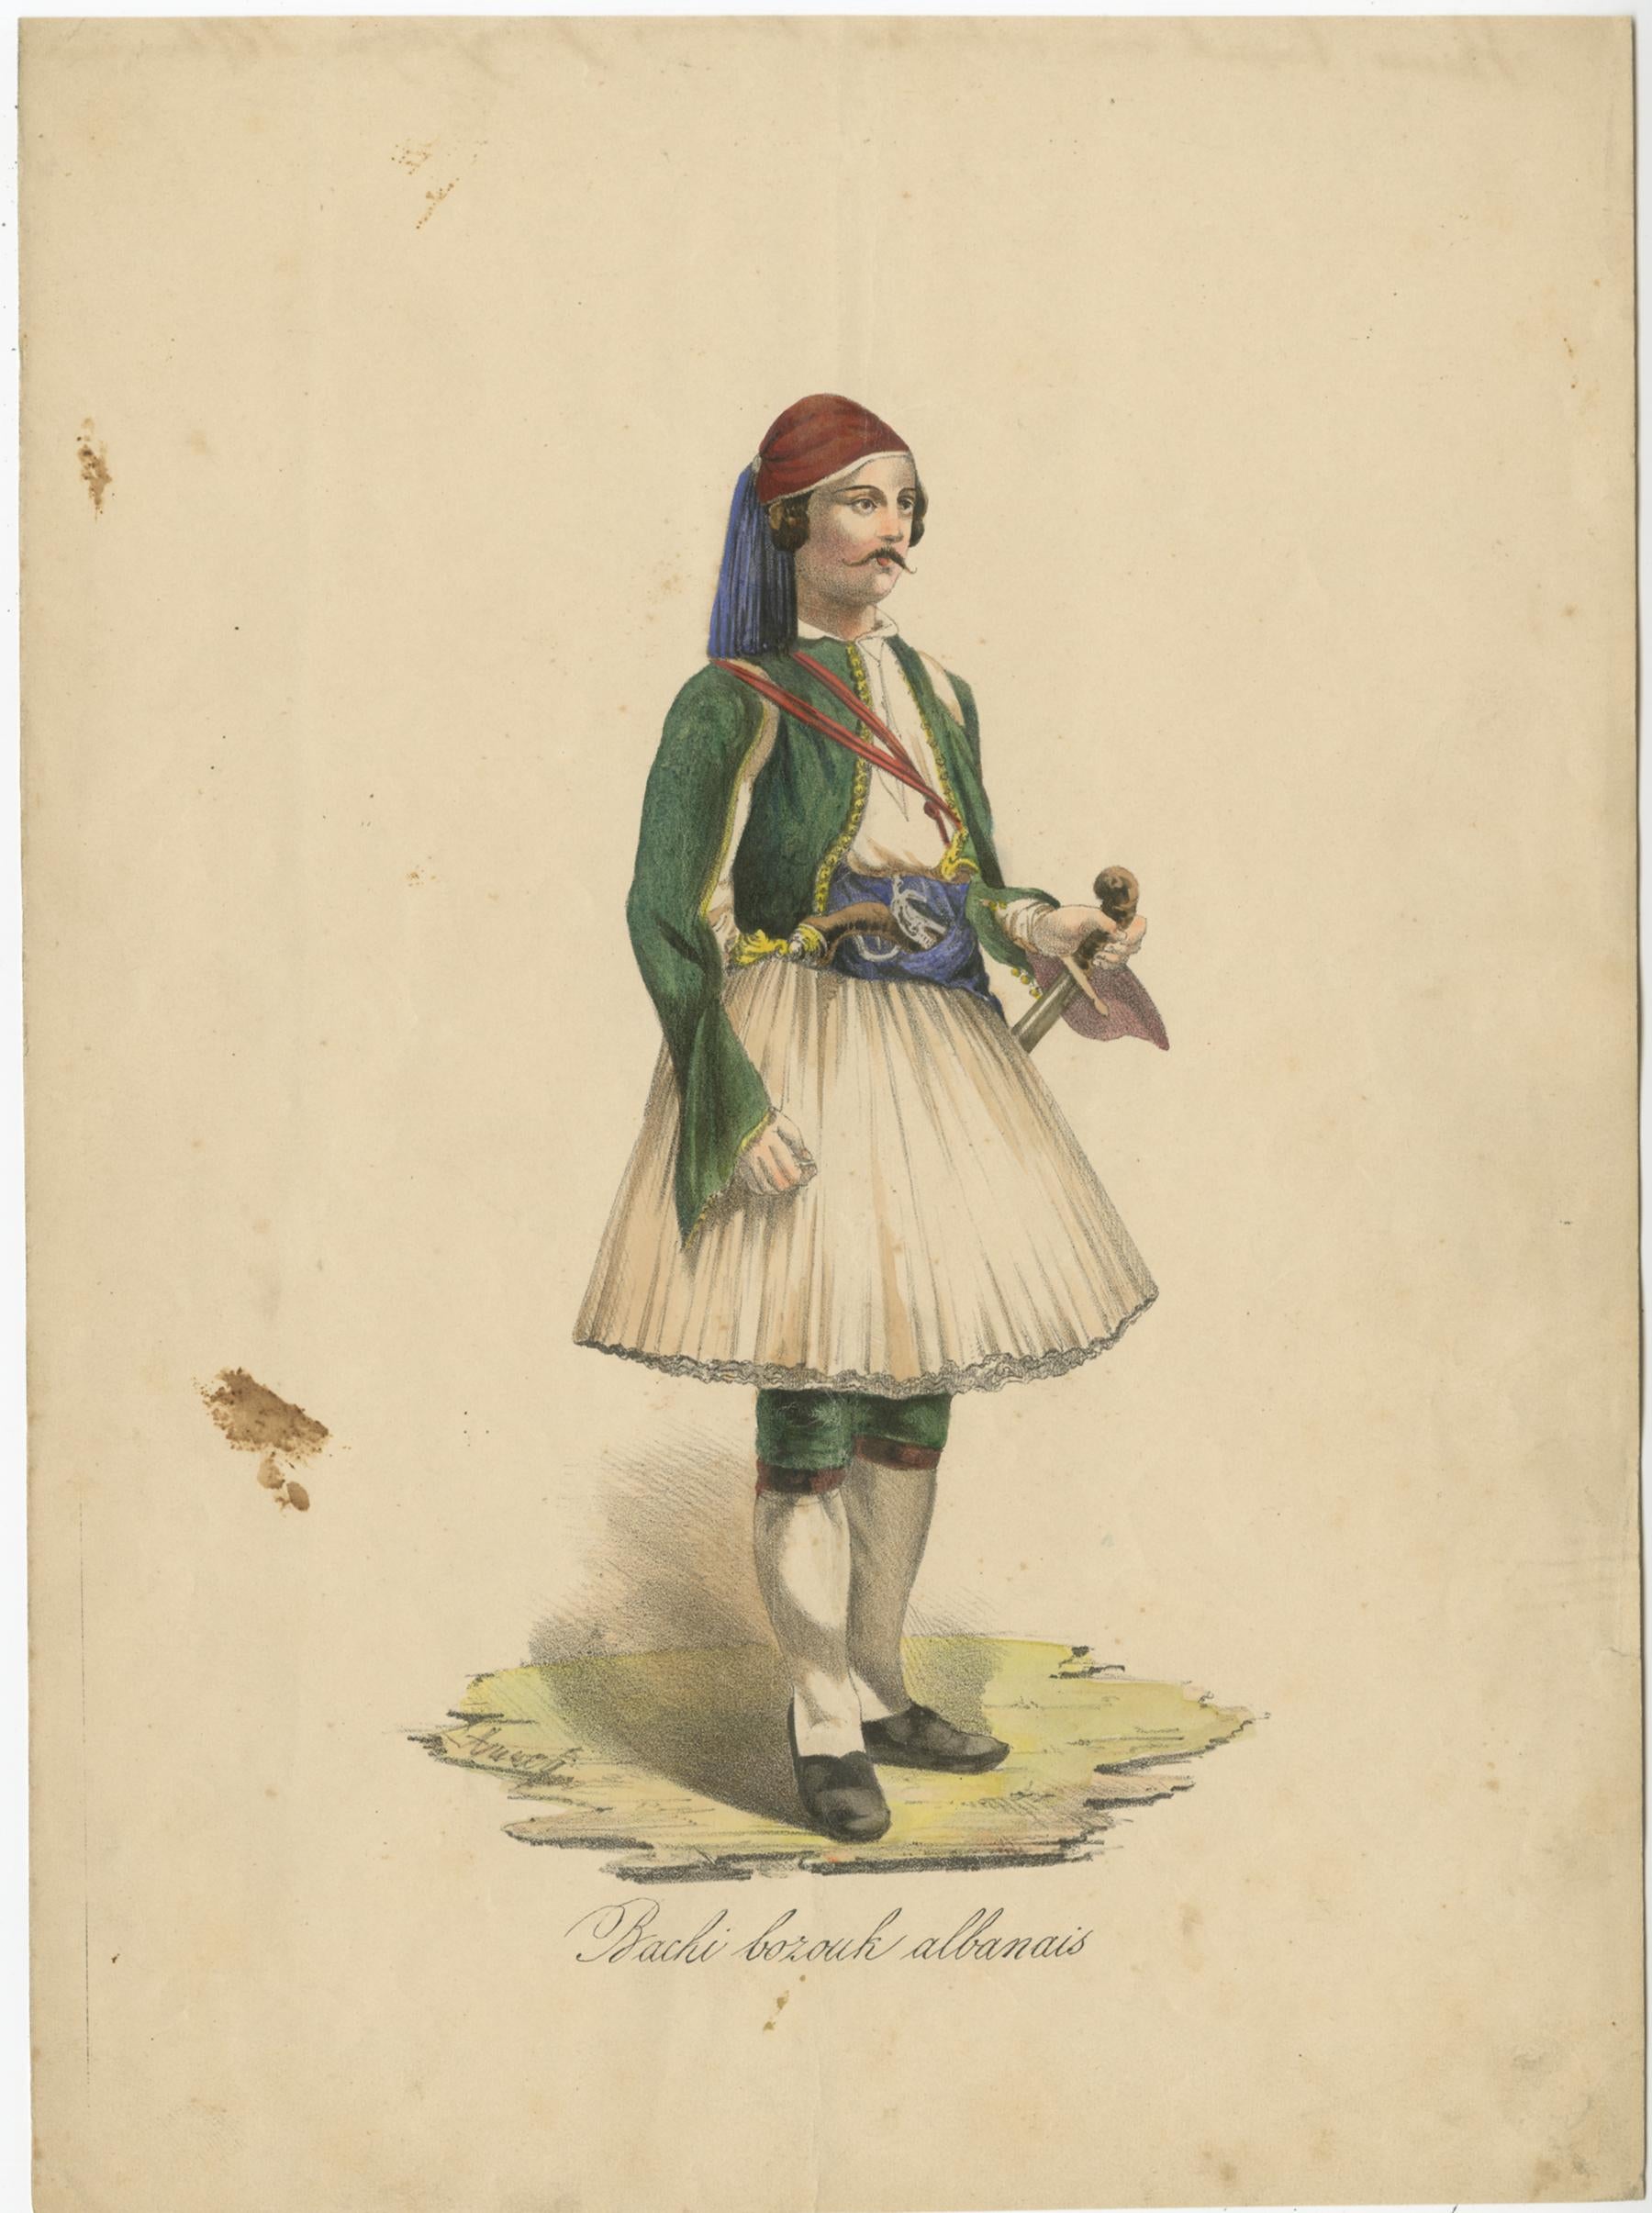 Set of nine antique costume prints including costumes of Turkey, Albania, Anatolia and others. Source unknown, to be determined. Published circa 1840.